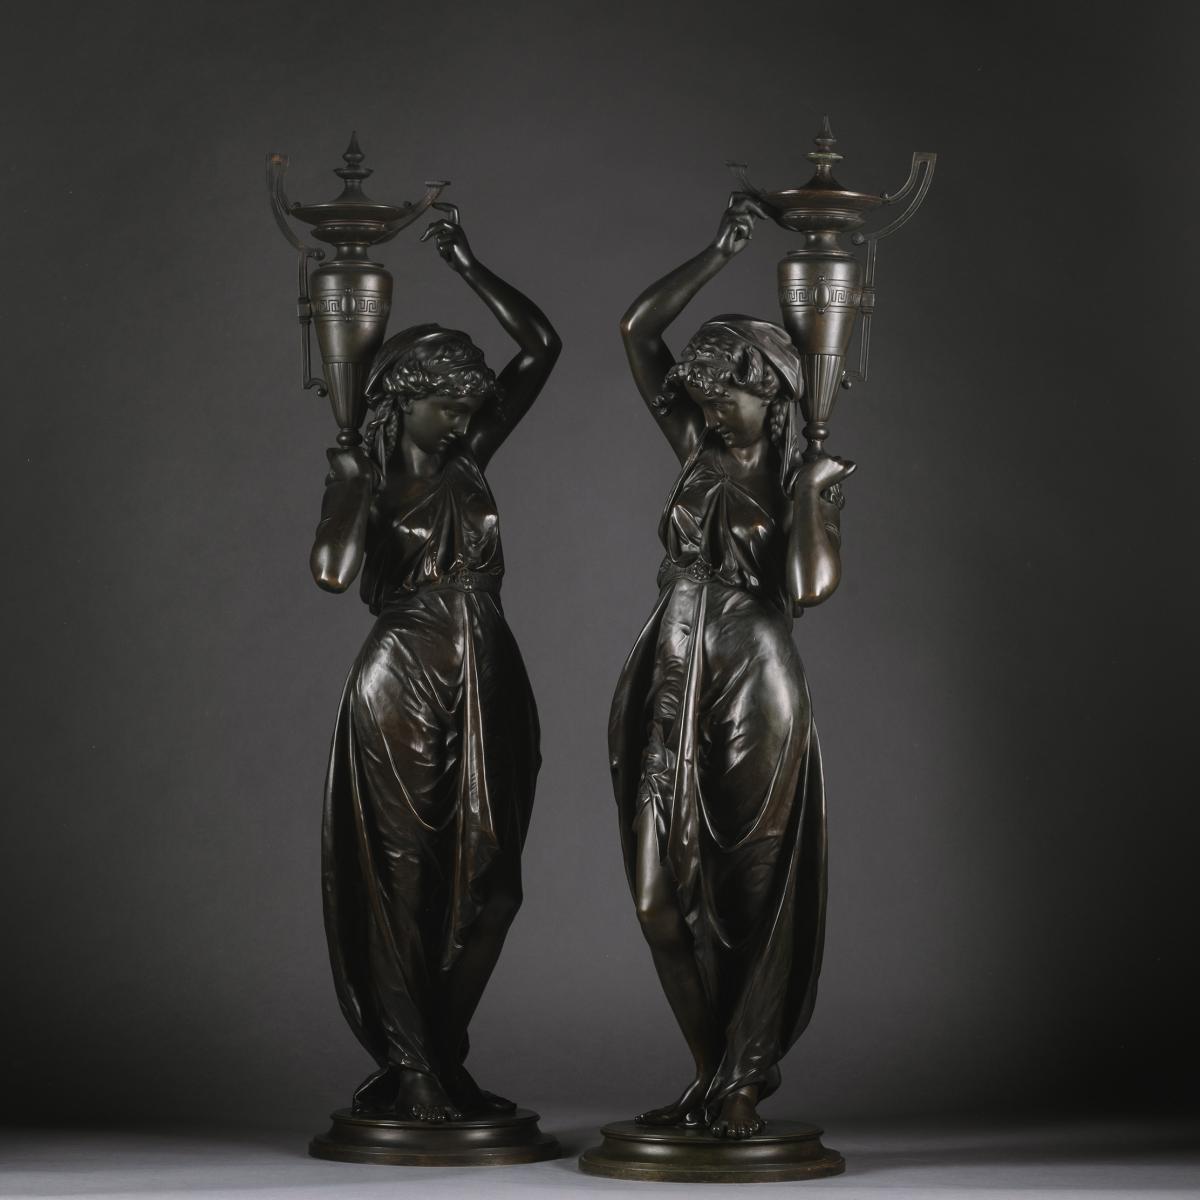 A Pair Of Napoleon III Patrinated-Bronze Figures, Modelled As Classically Robed Maidens Bearing Urns, by Victor Paillard (French, 1805-1886)